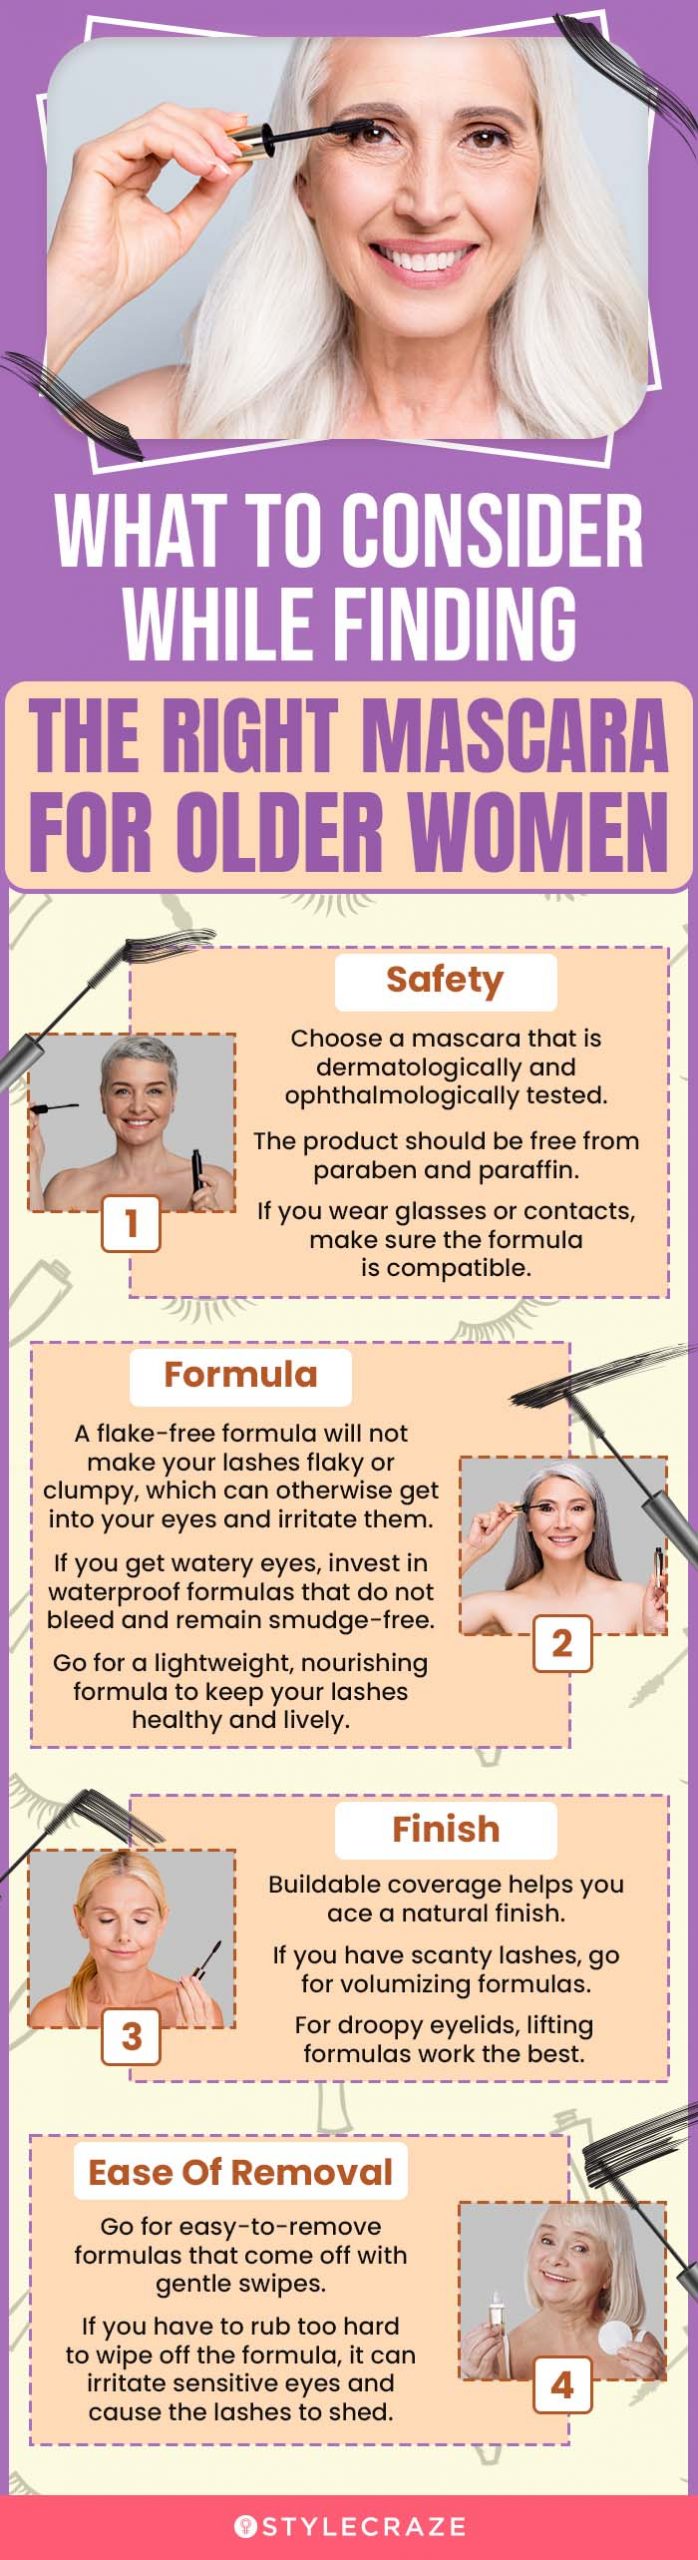 What To Consider While Finding The Right Mascara For Older Women (infographic)